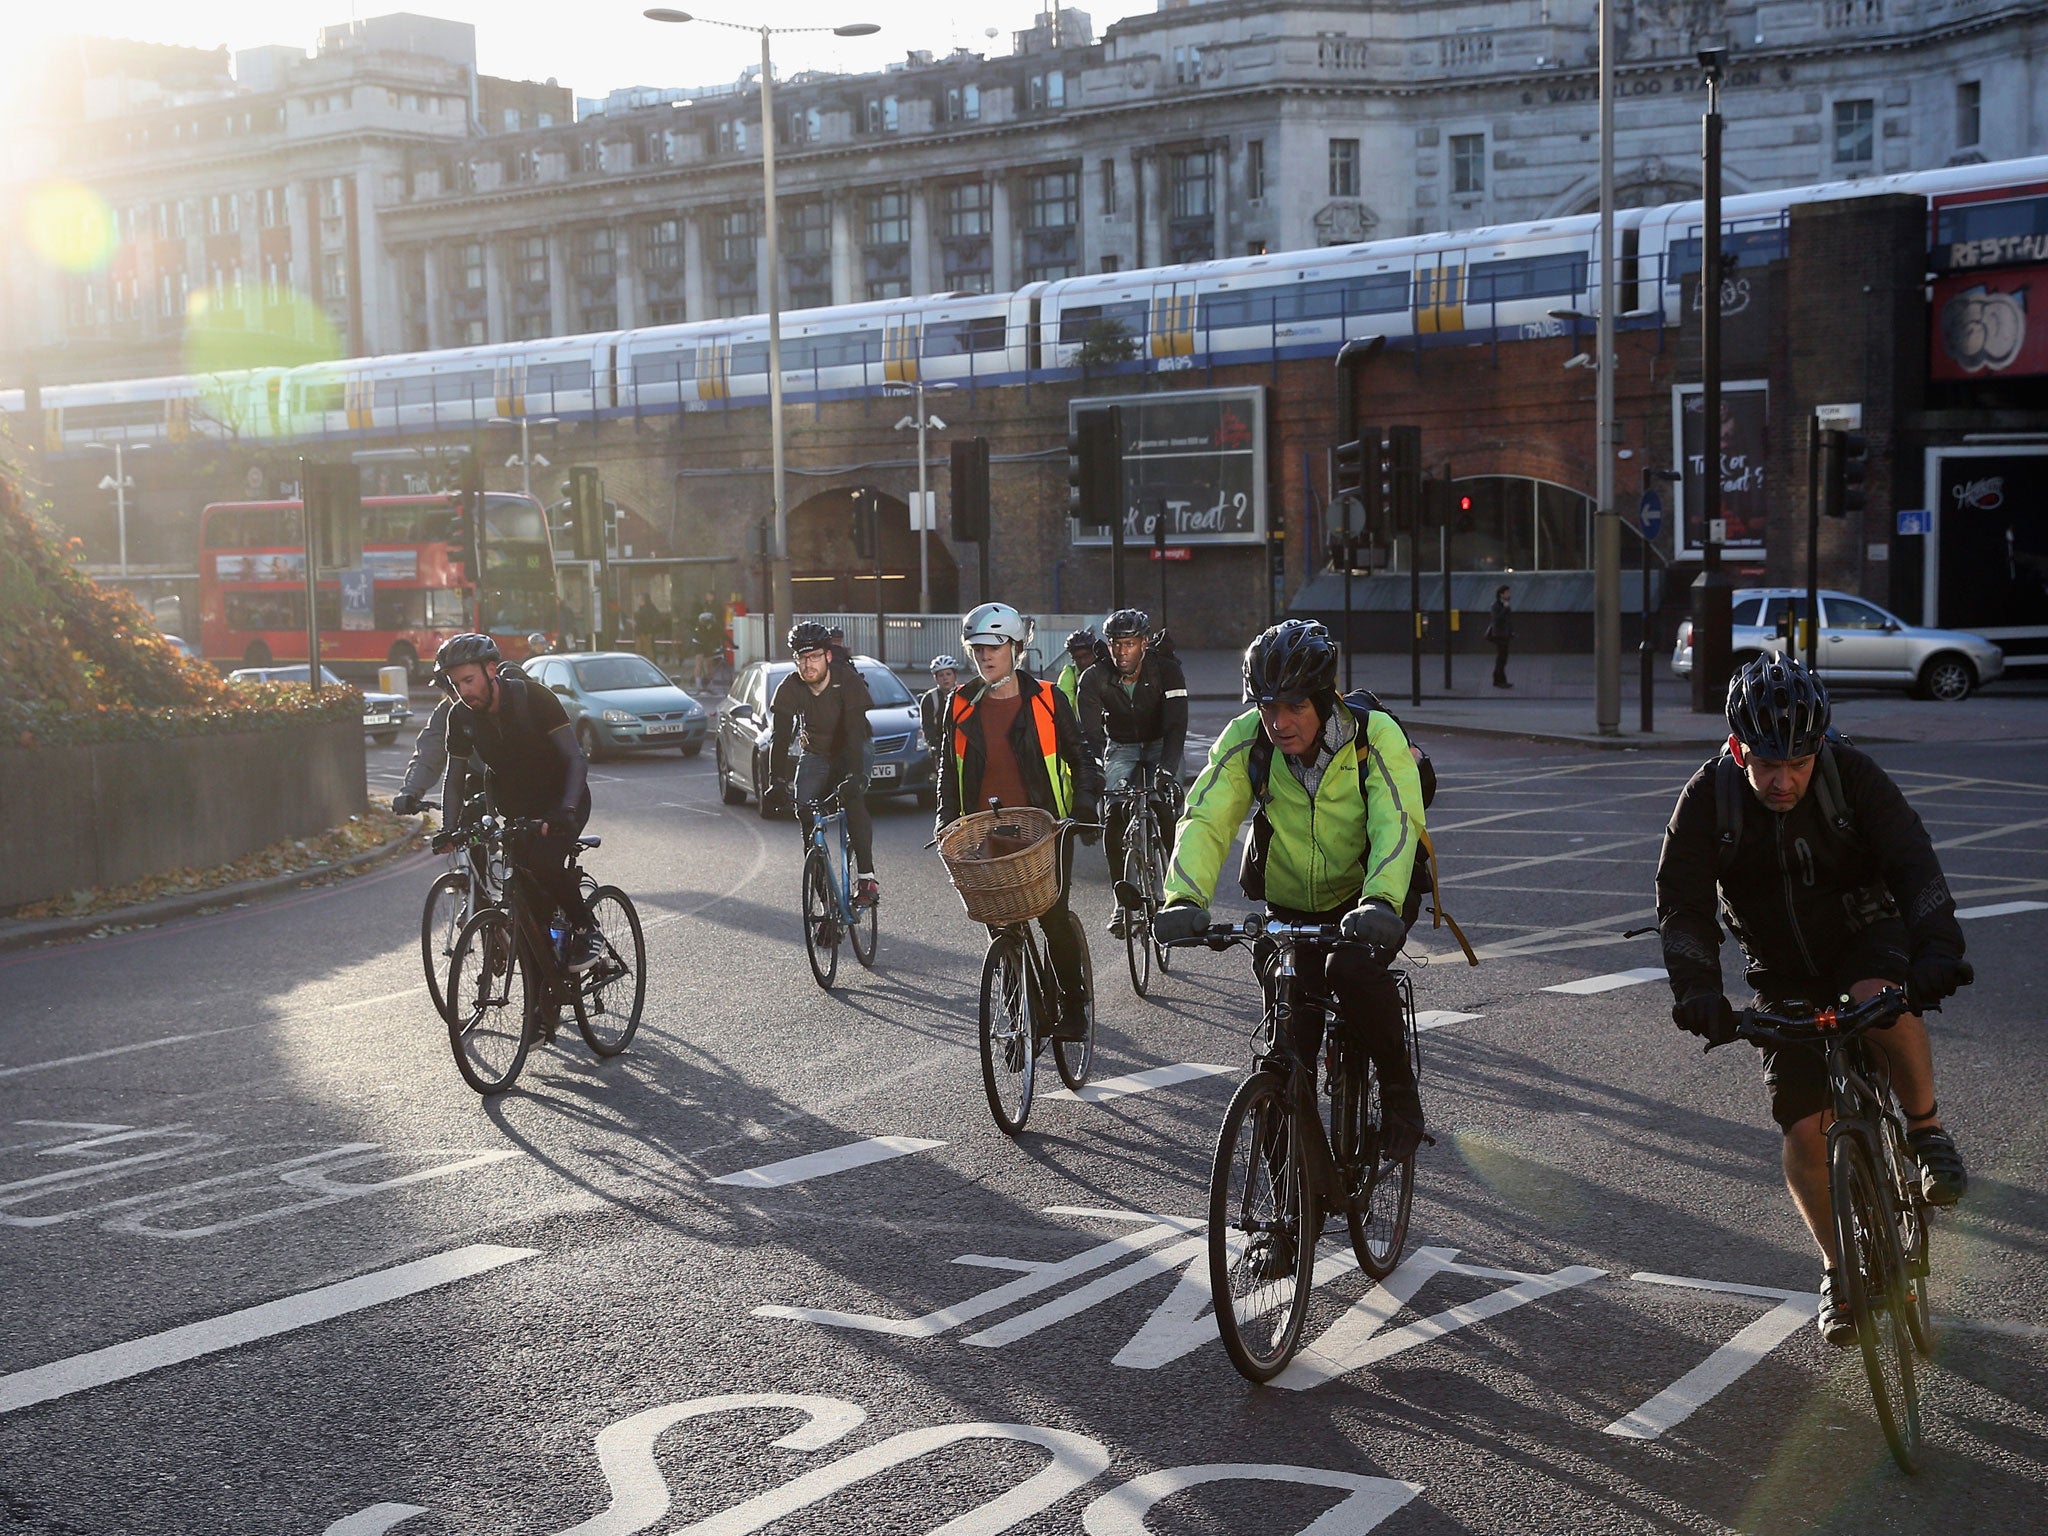 TfL will work to make London’s entire road transport system zero emission by 2050 at the latest